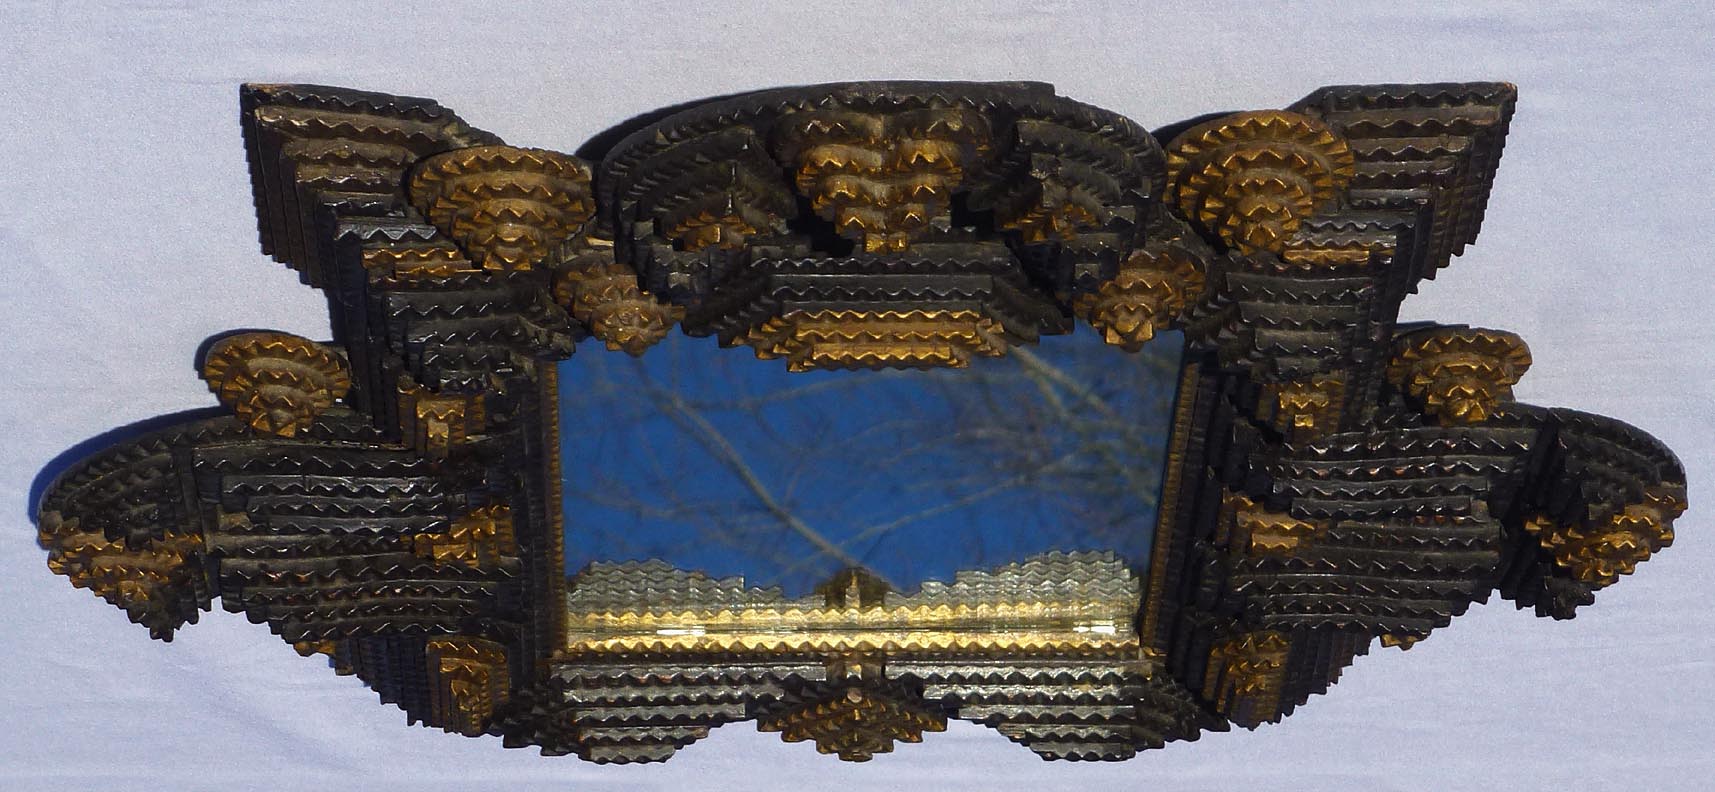 Elaborate tramp art frame with hearts and mirrors